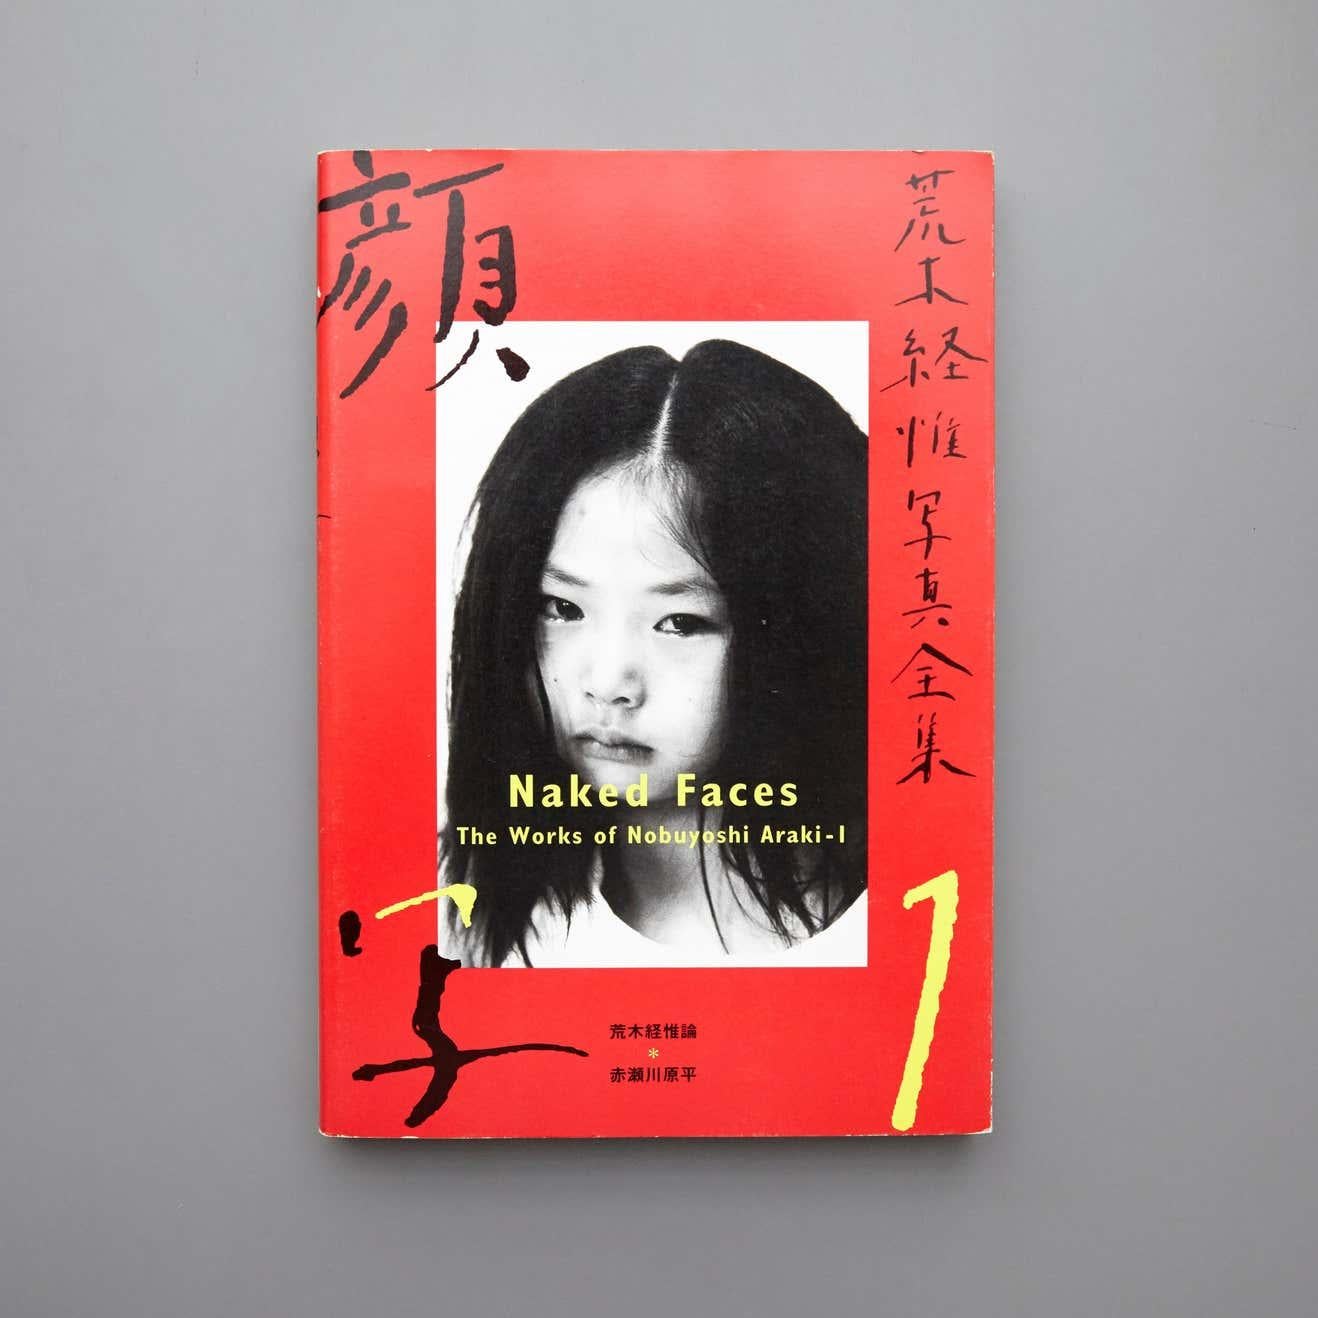 The works of Nobuyoshi Araki Book collection Nº1 published in Japan in 1996 by Heibonsha Limited, Publisher.

Signed by hand.

Nobuyoshi Araki born May 25, 1940) is a Japanese photographer and contemporary artist.

Having published over 350